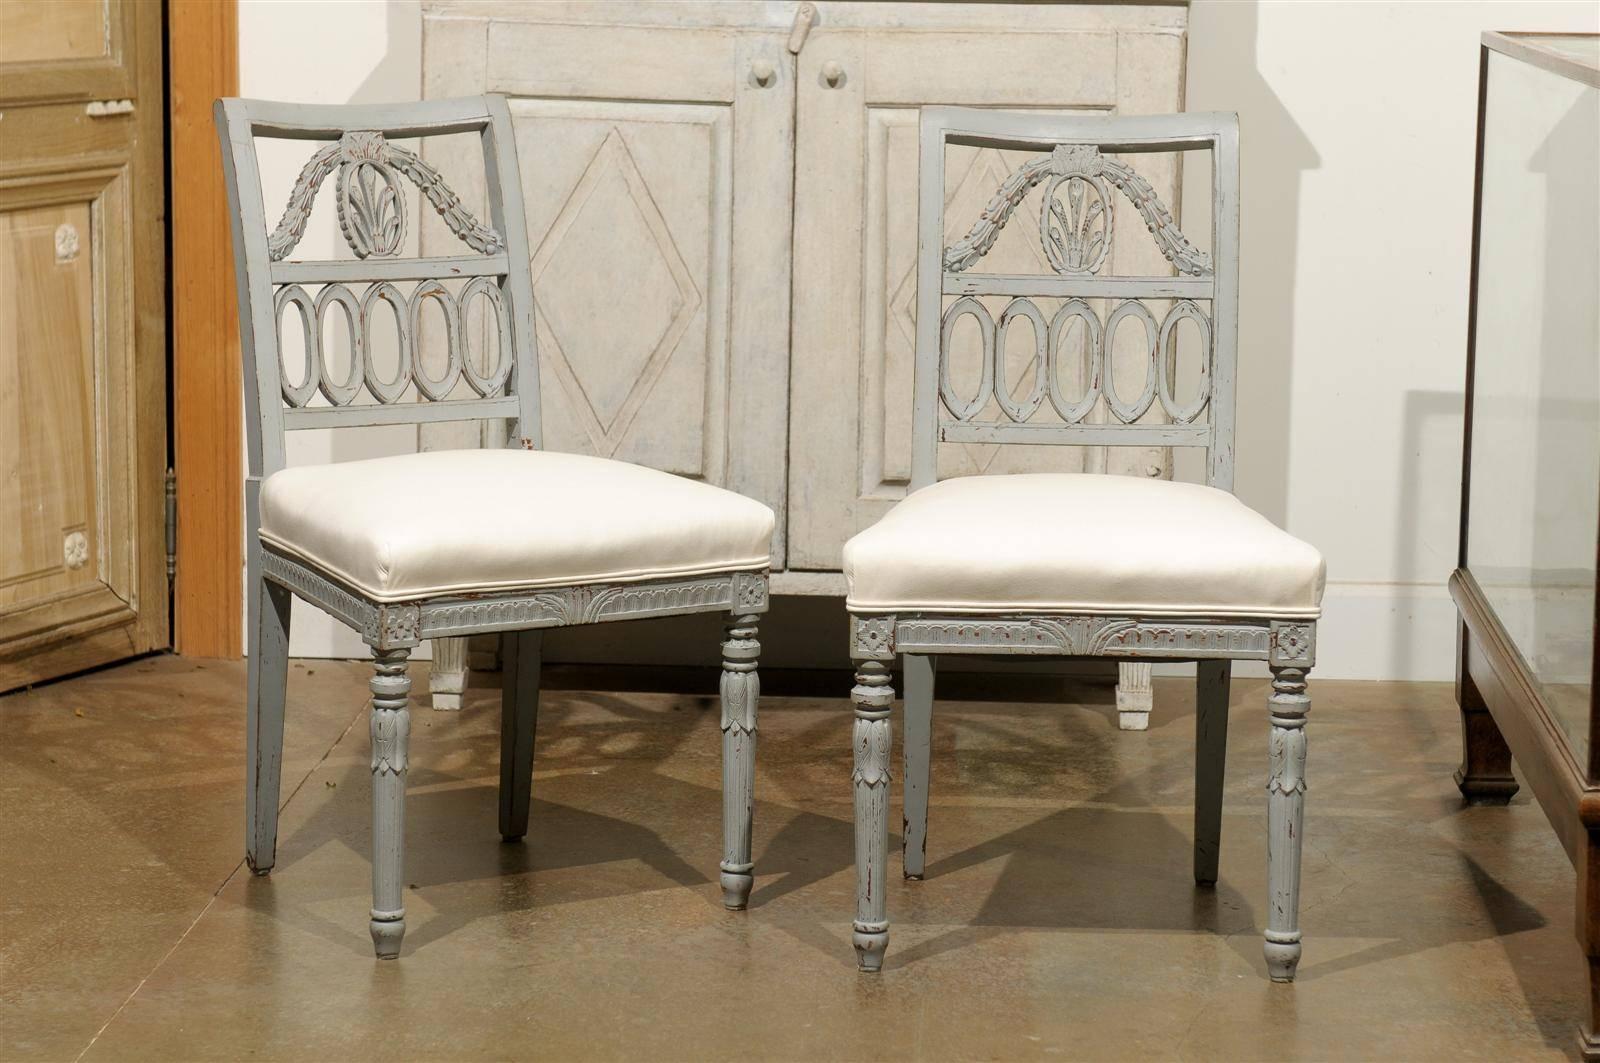 A Set of four Swedish Neoclassical style painted wood Lindome chairs from the early 20th century with upholstered seats. This set of four painted wood chairs was born in Lindome, a town from the Halland province of Sweden in the 1920s. Lindome was